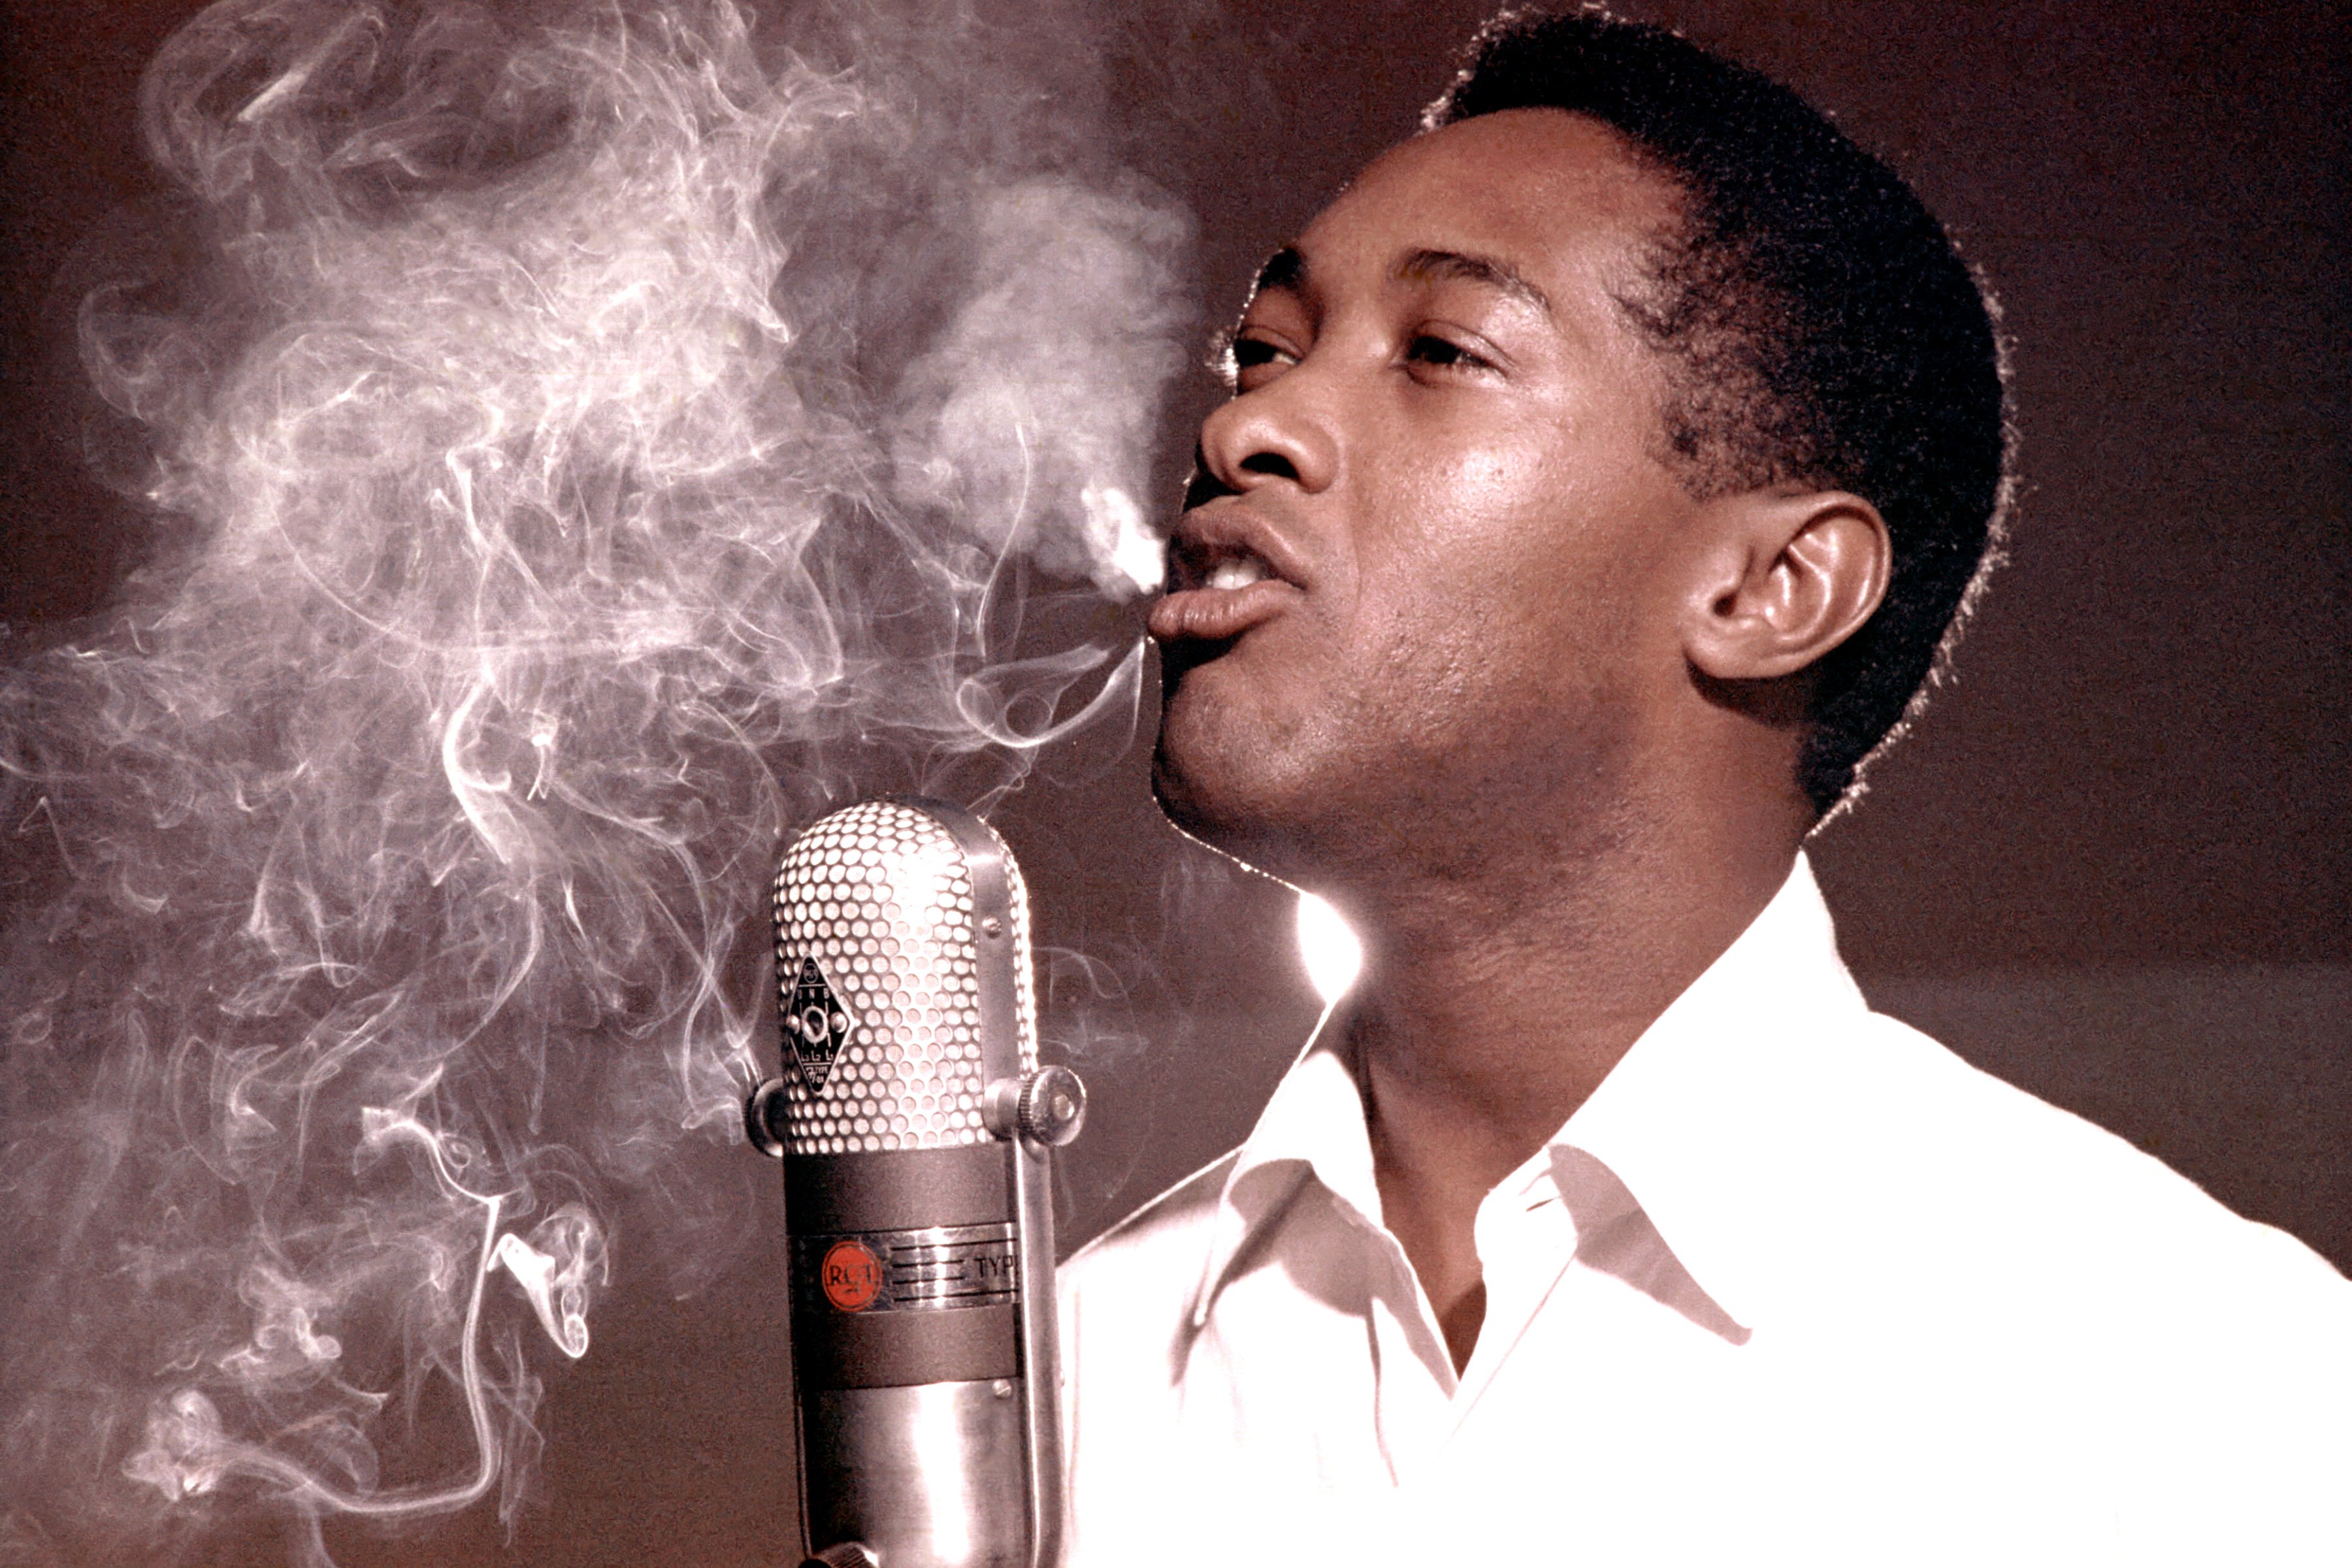 Sam Cooke pictured in New York City in 1958 | Source: Getty Images